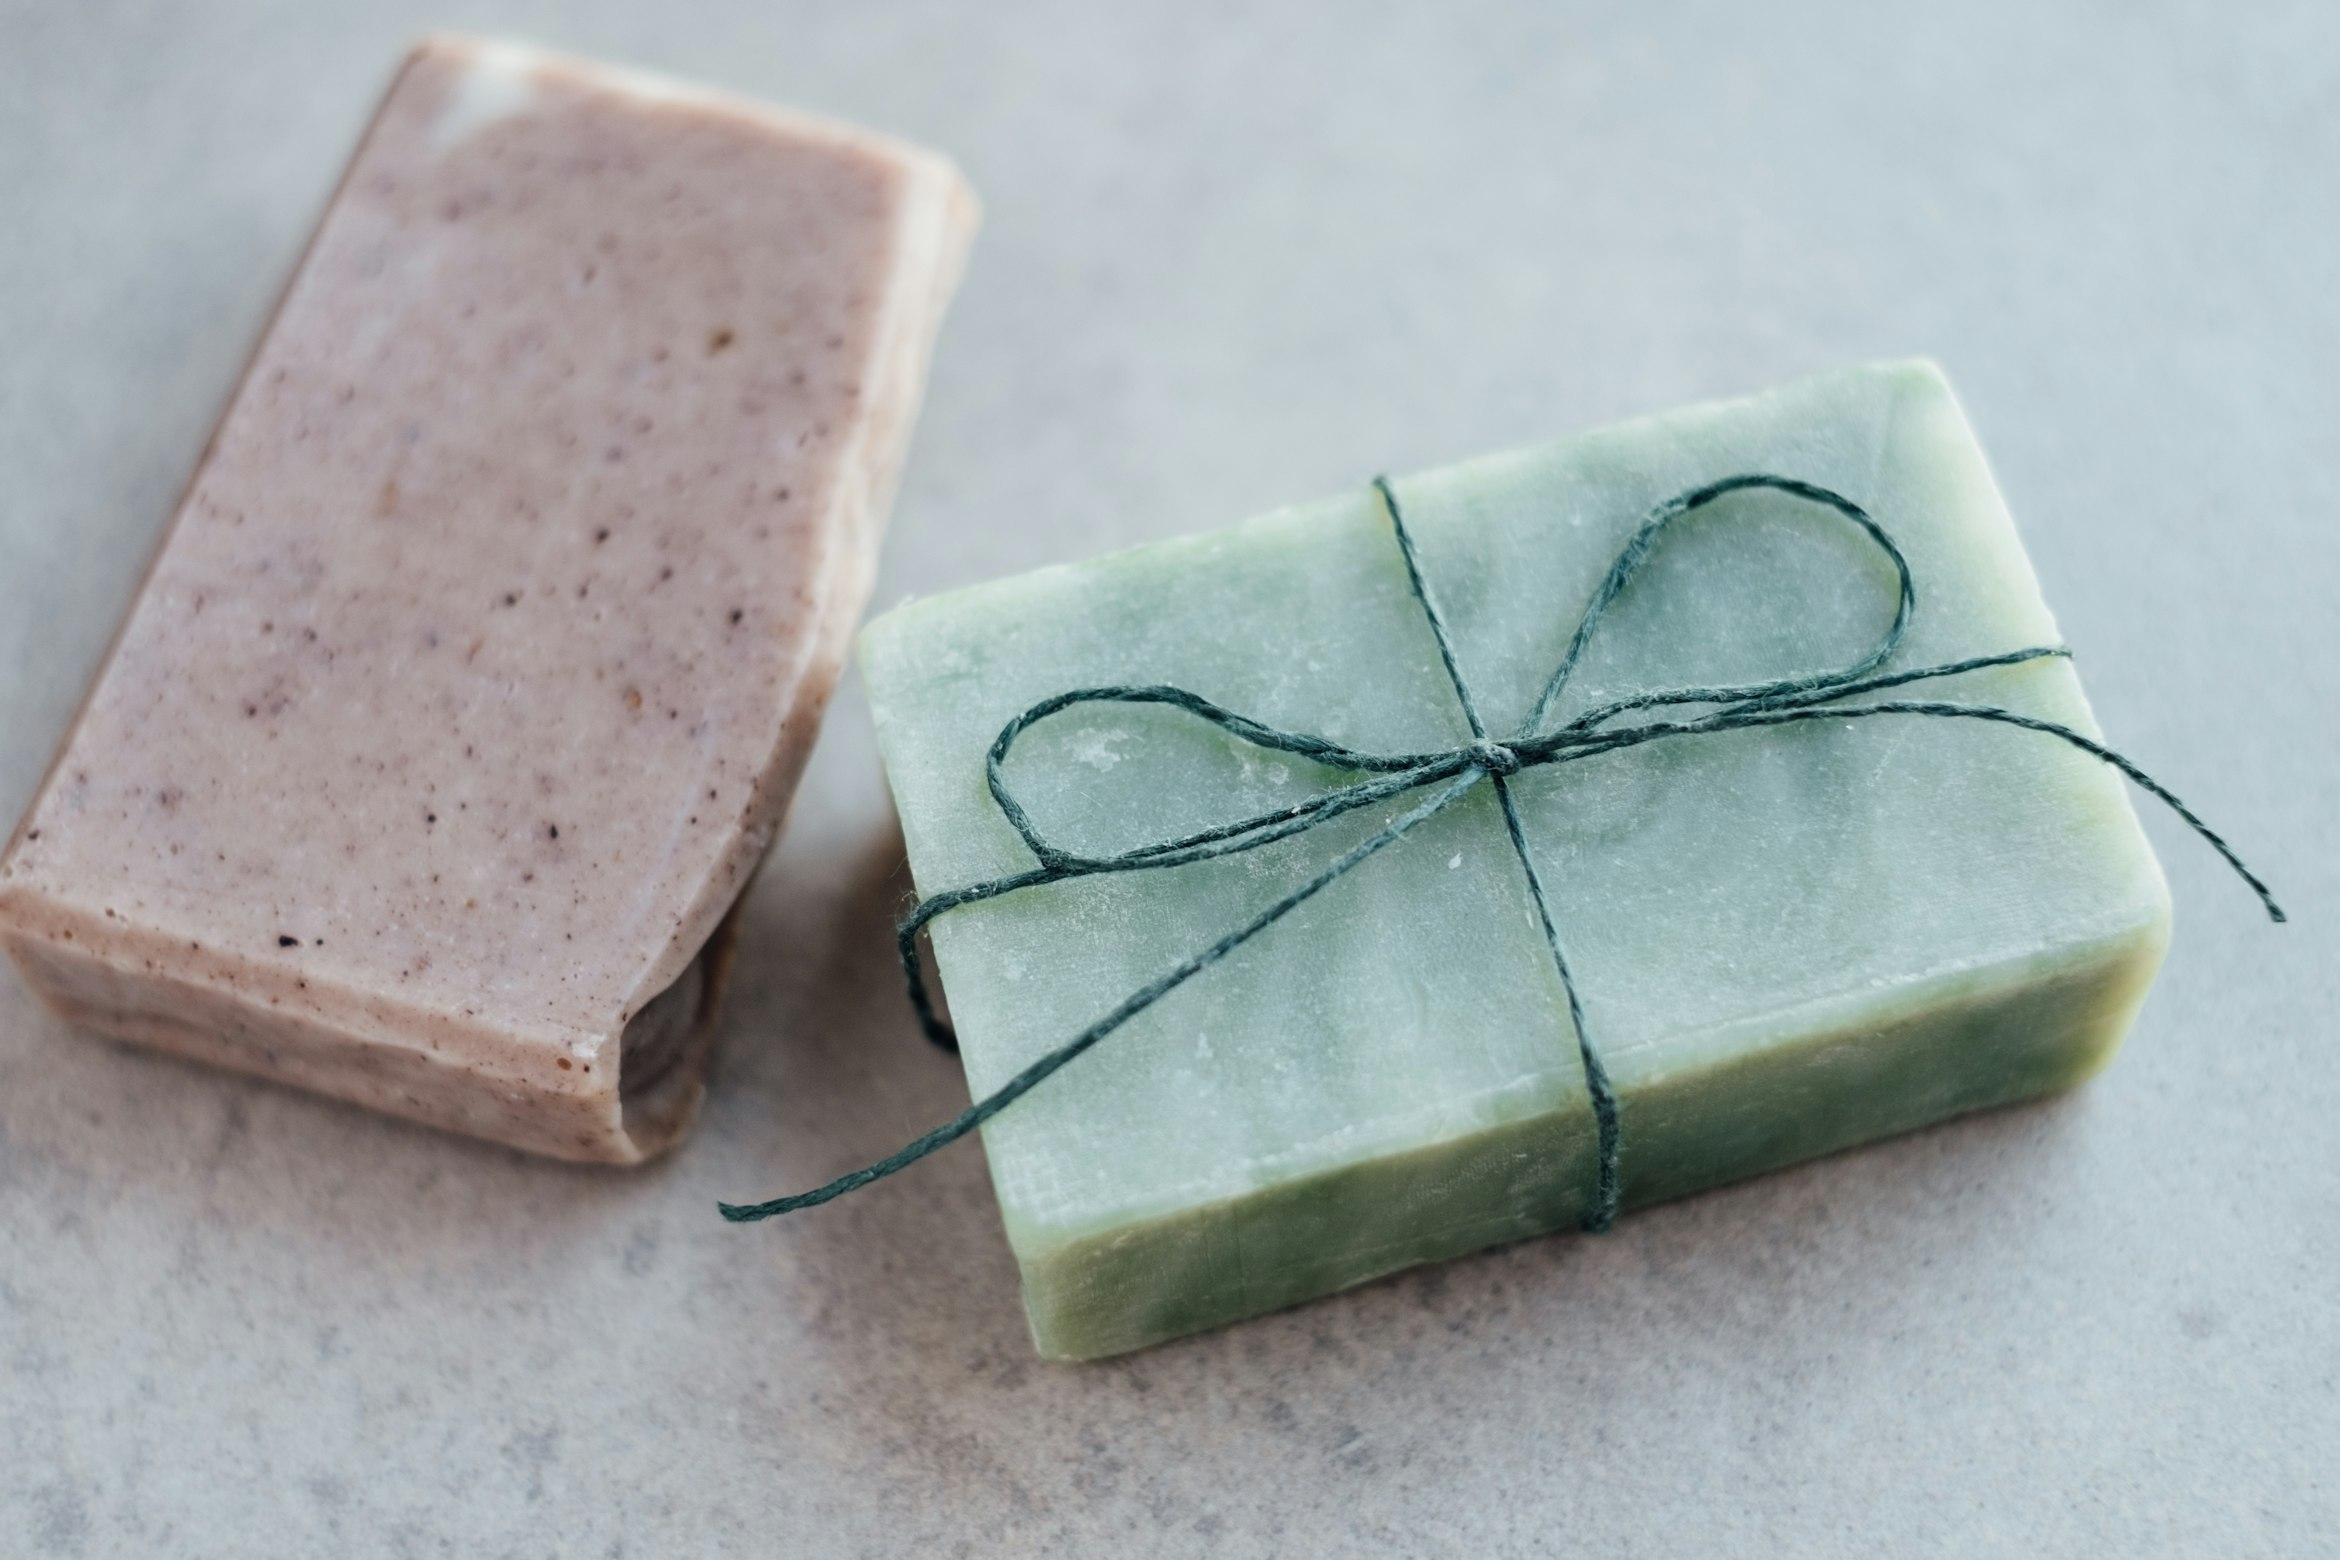 Learn to Make Soap at Home